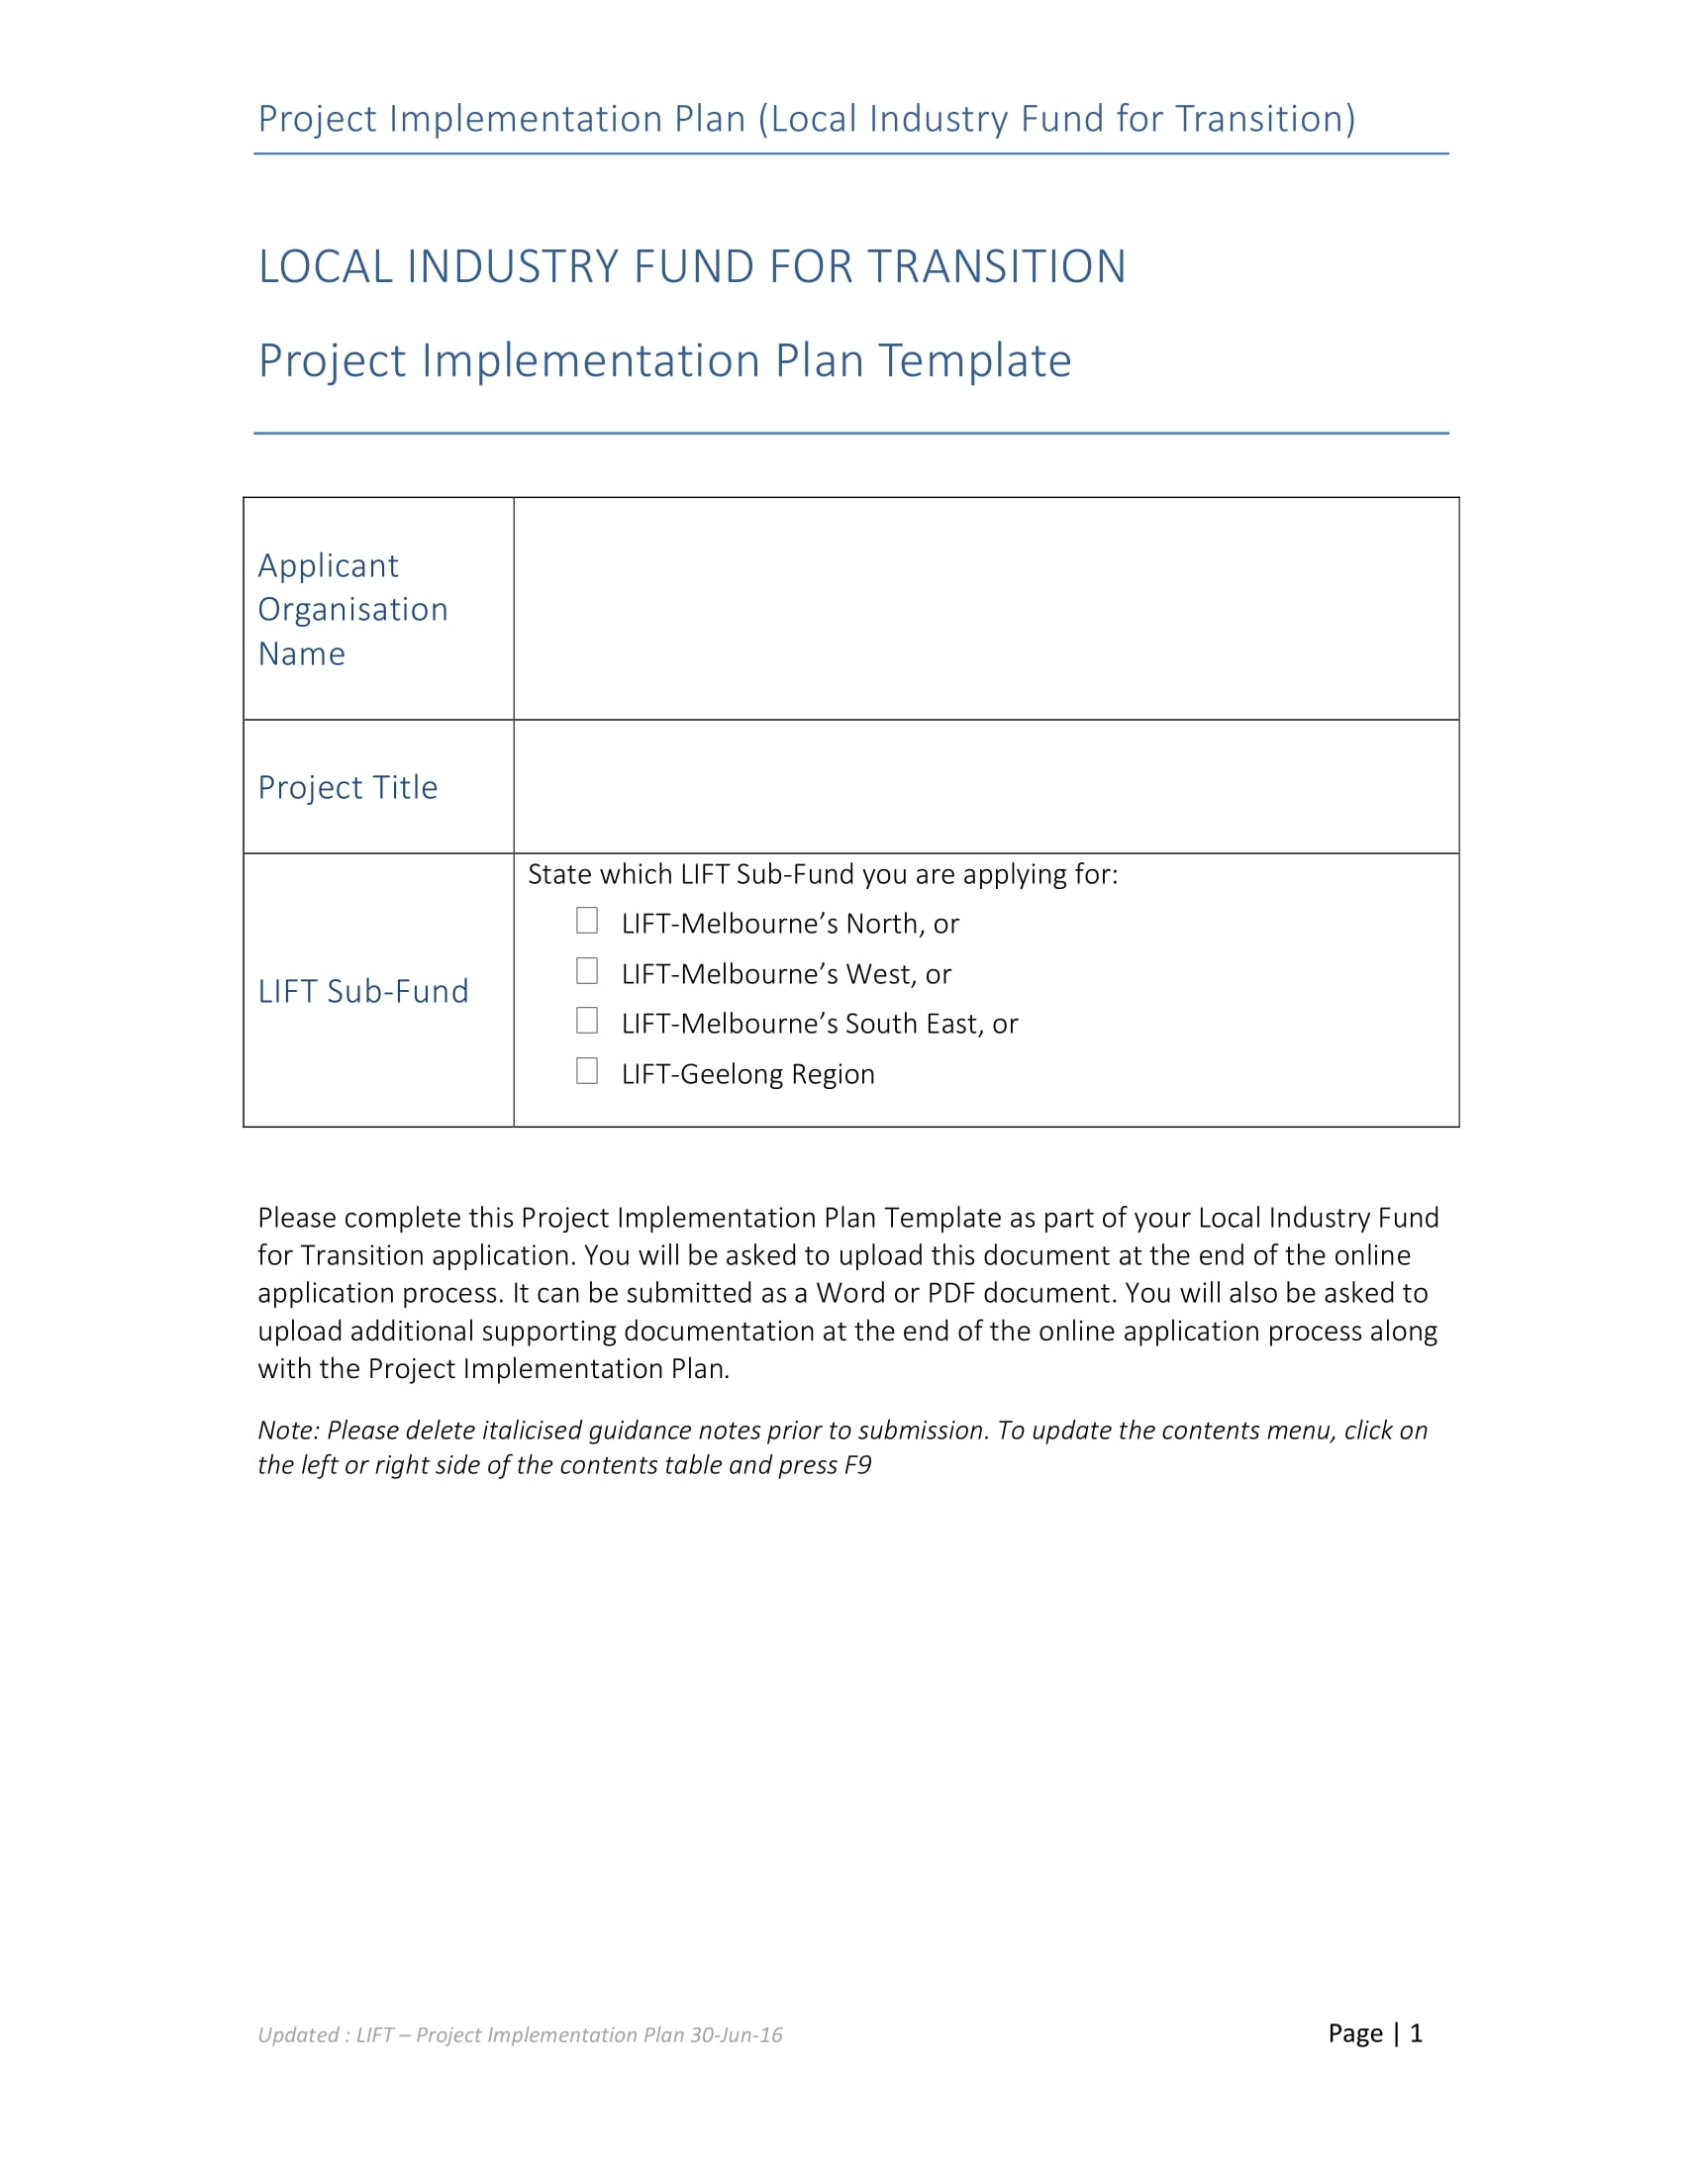 Project Management Plan Examples - 18+ In Pdf | Ms Word | Pages Pertaining To Project Management Proposal Template